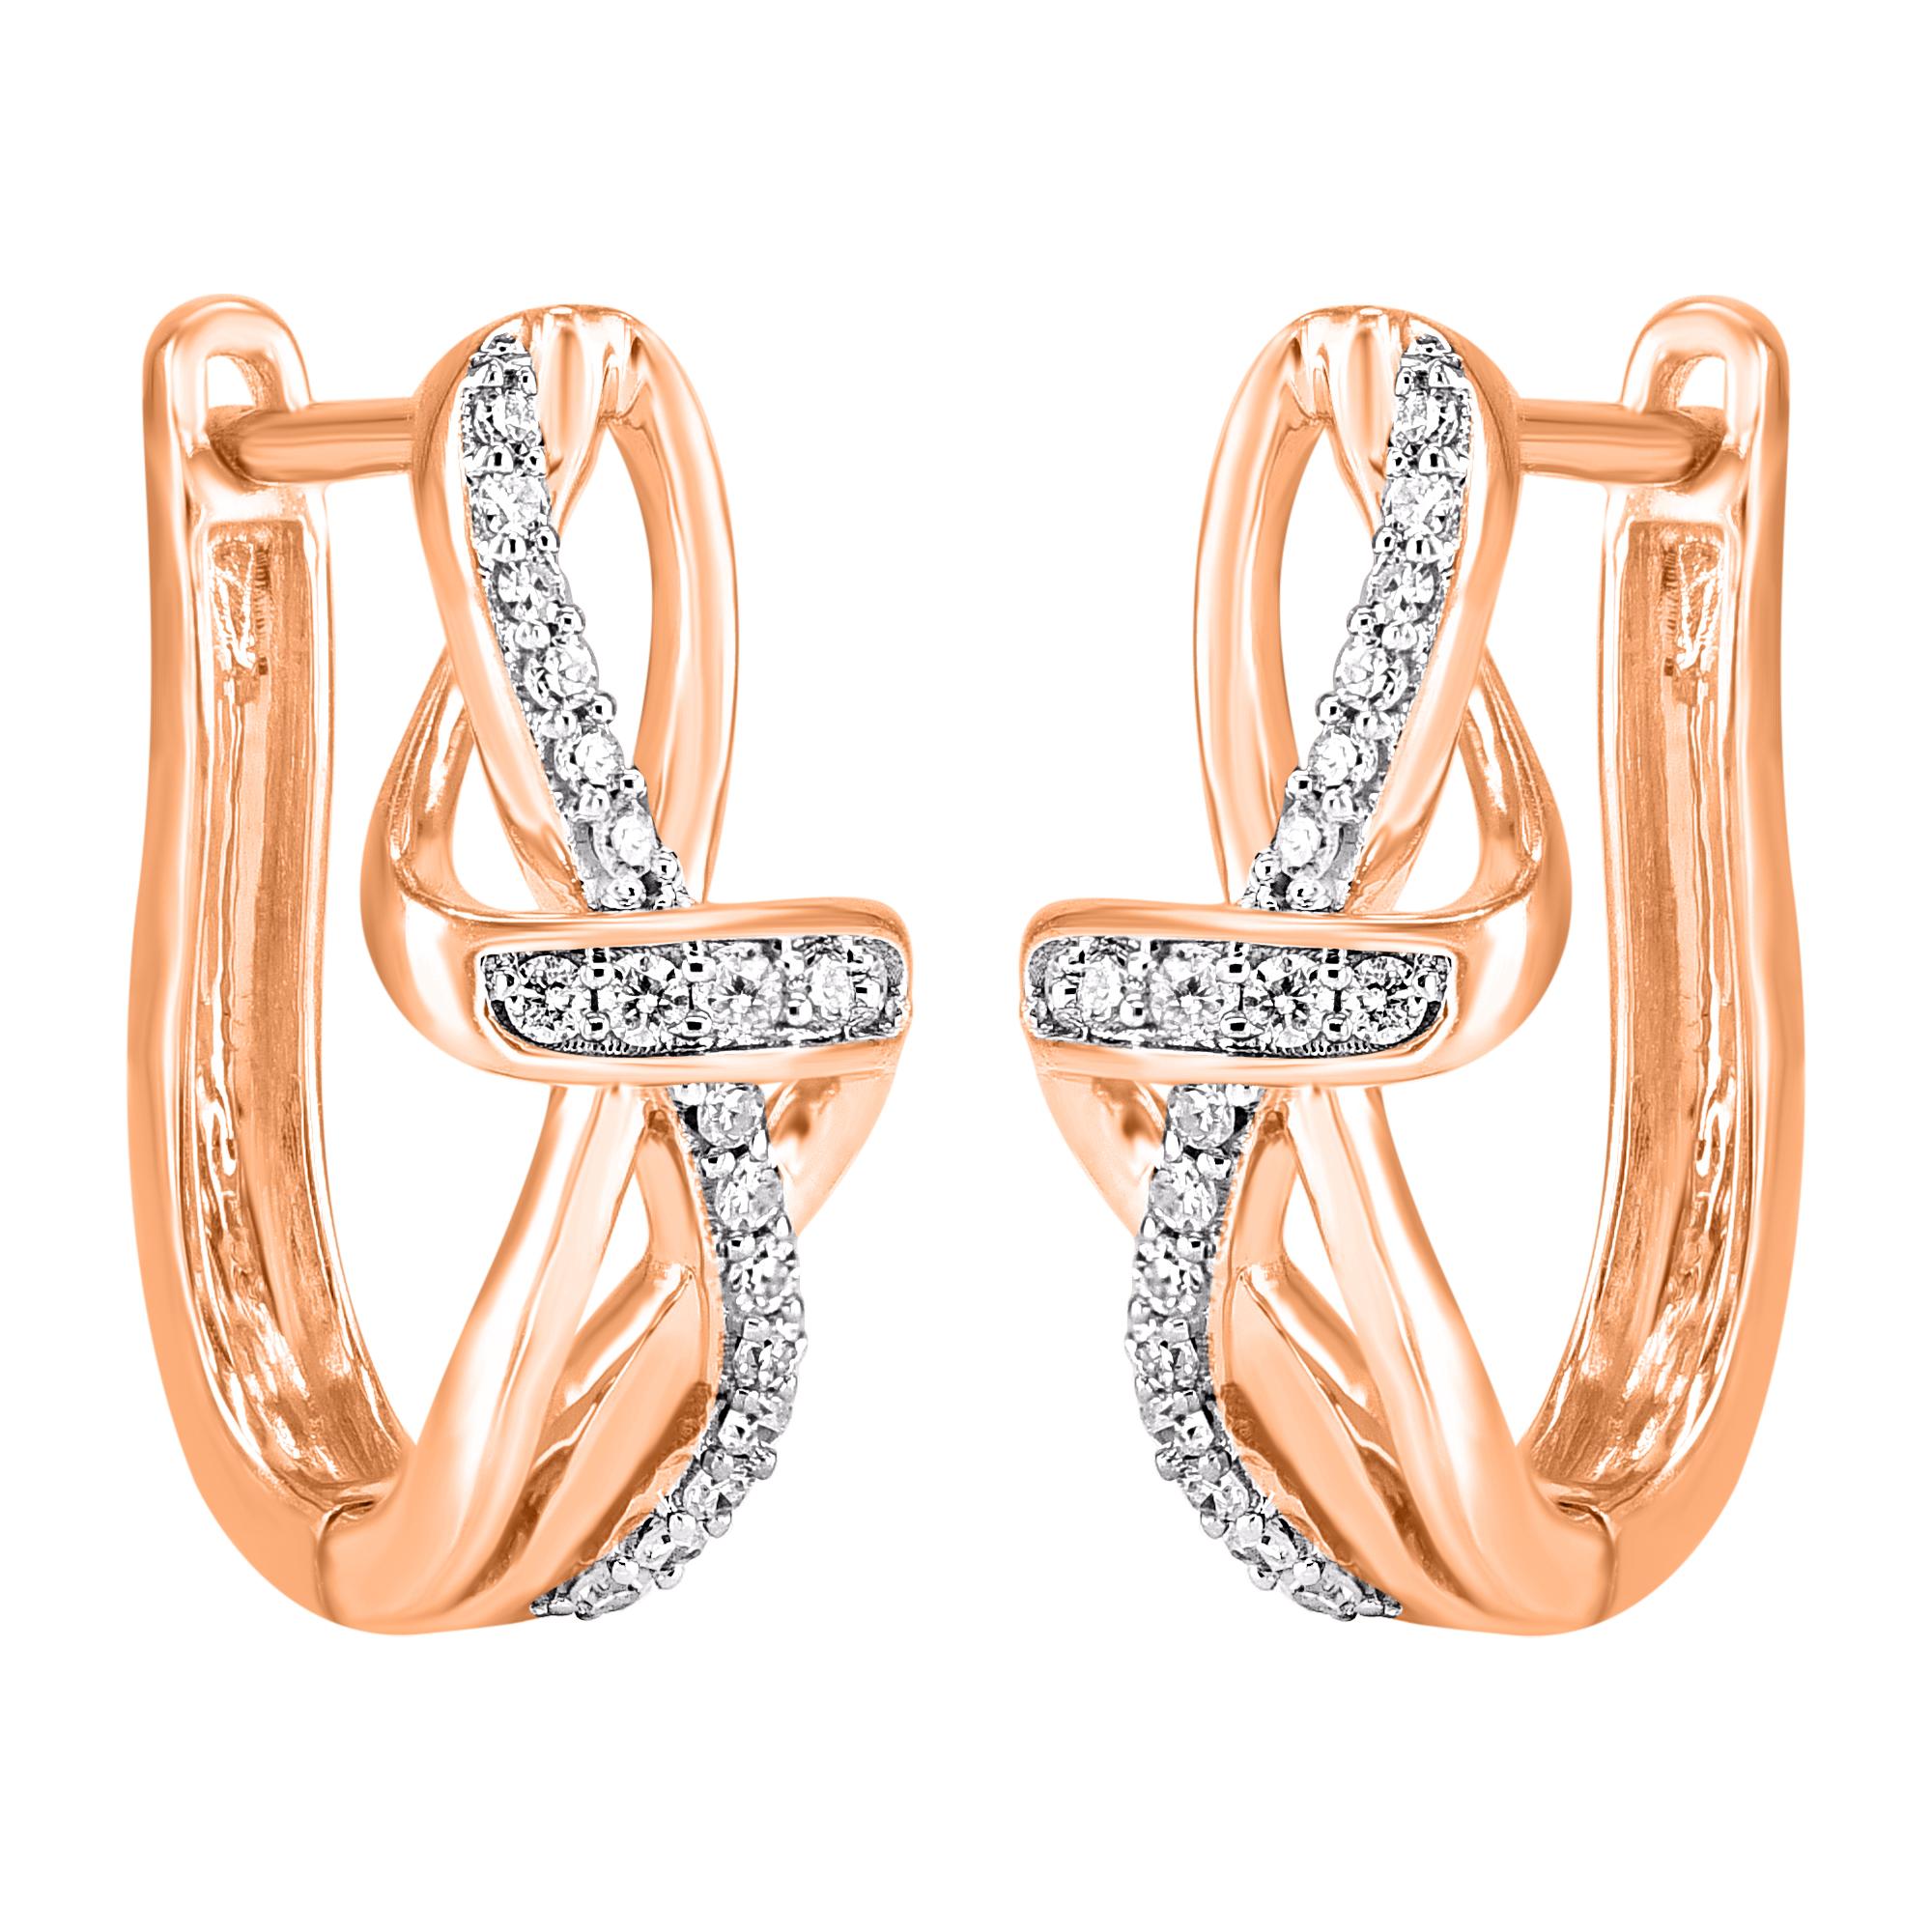 A sparkling delight, these diamond twisted knot earrings fit her charming aesthetic. Embellished with 38 round diamond set in prong setting, and dazzles with H-I color I2 clarity. Captivating with 0.20 Carat and secures comfortably with safety lock.
